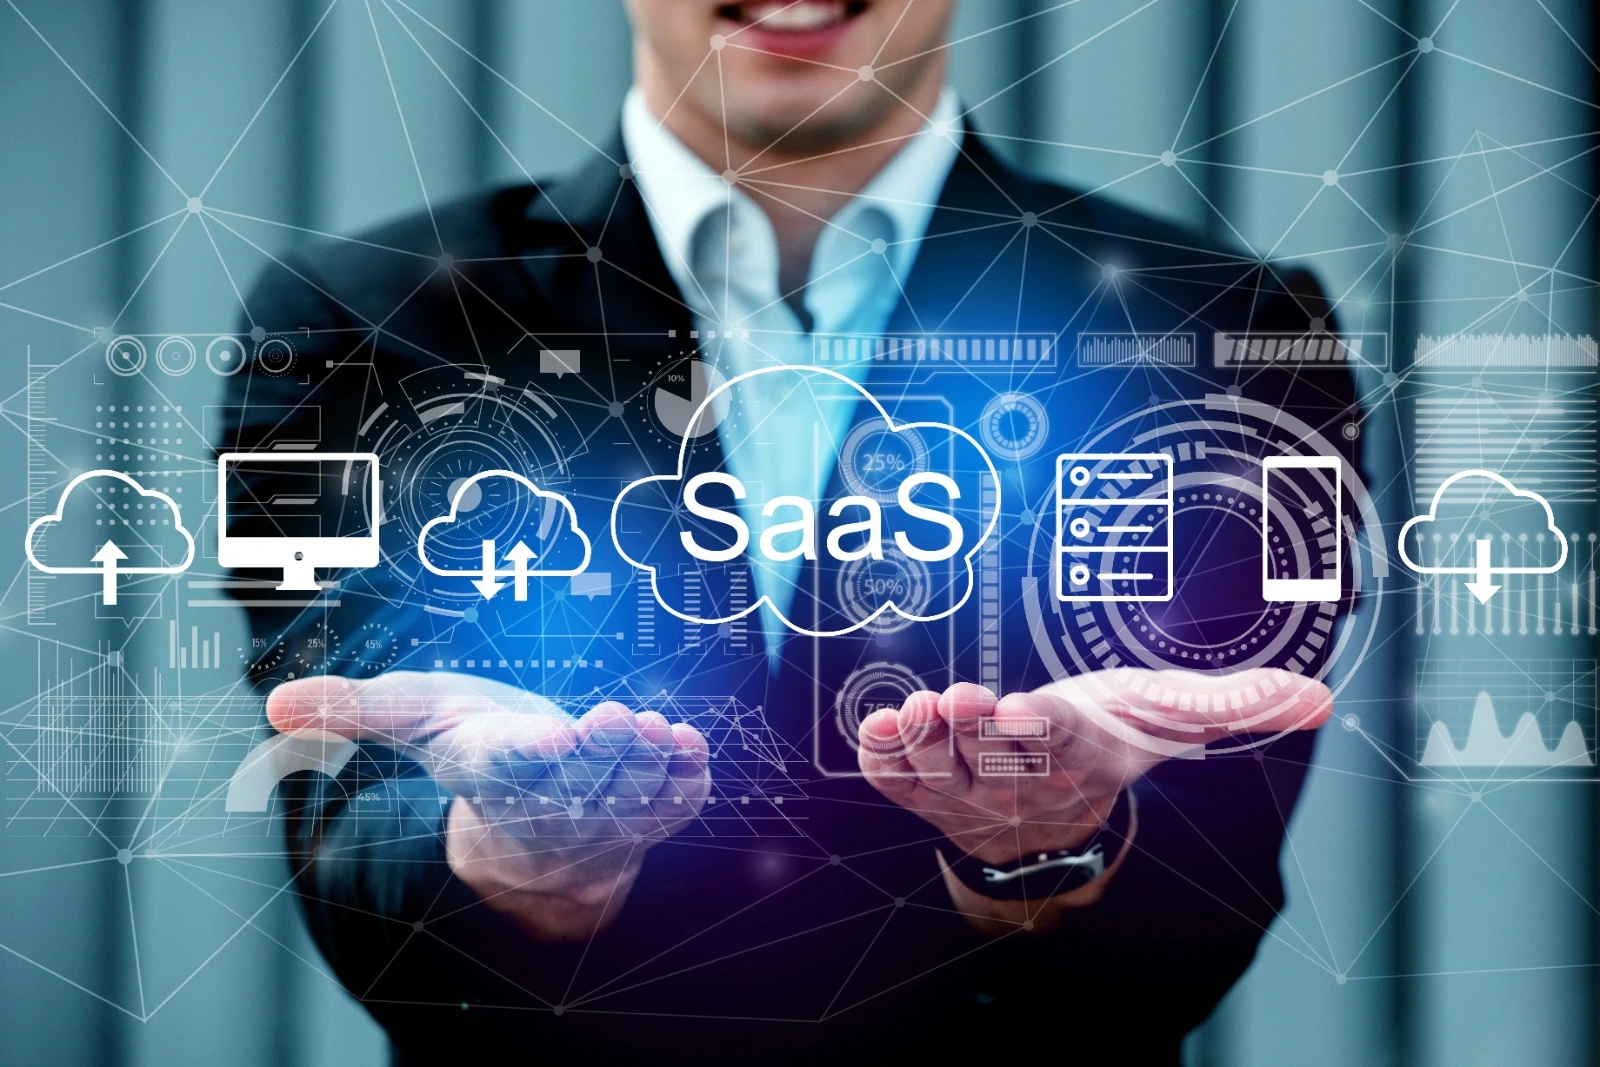 saas(software as a service)